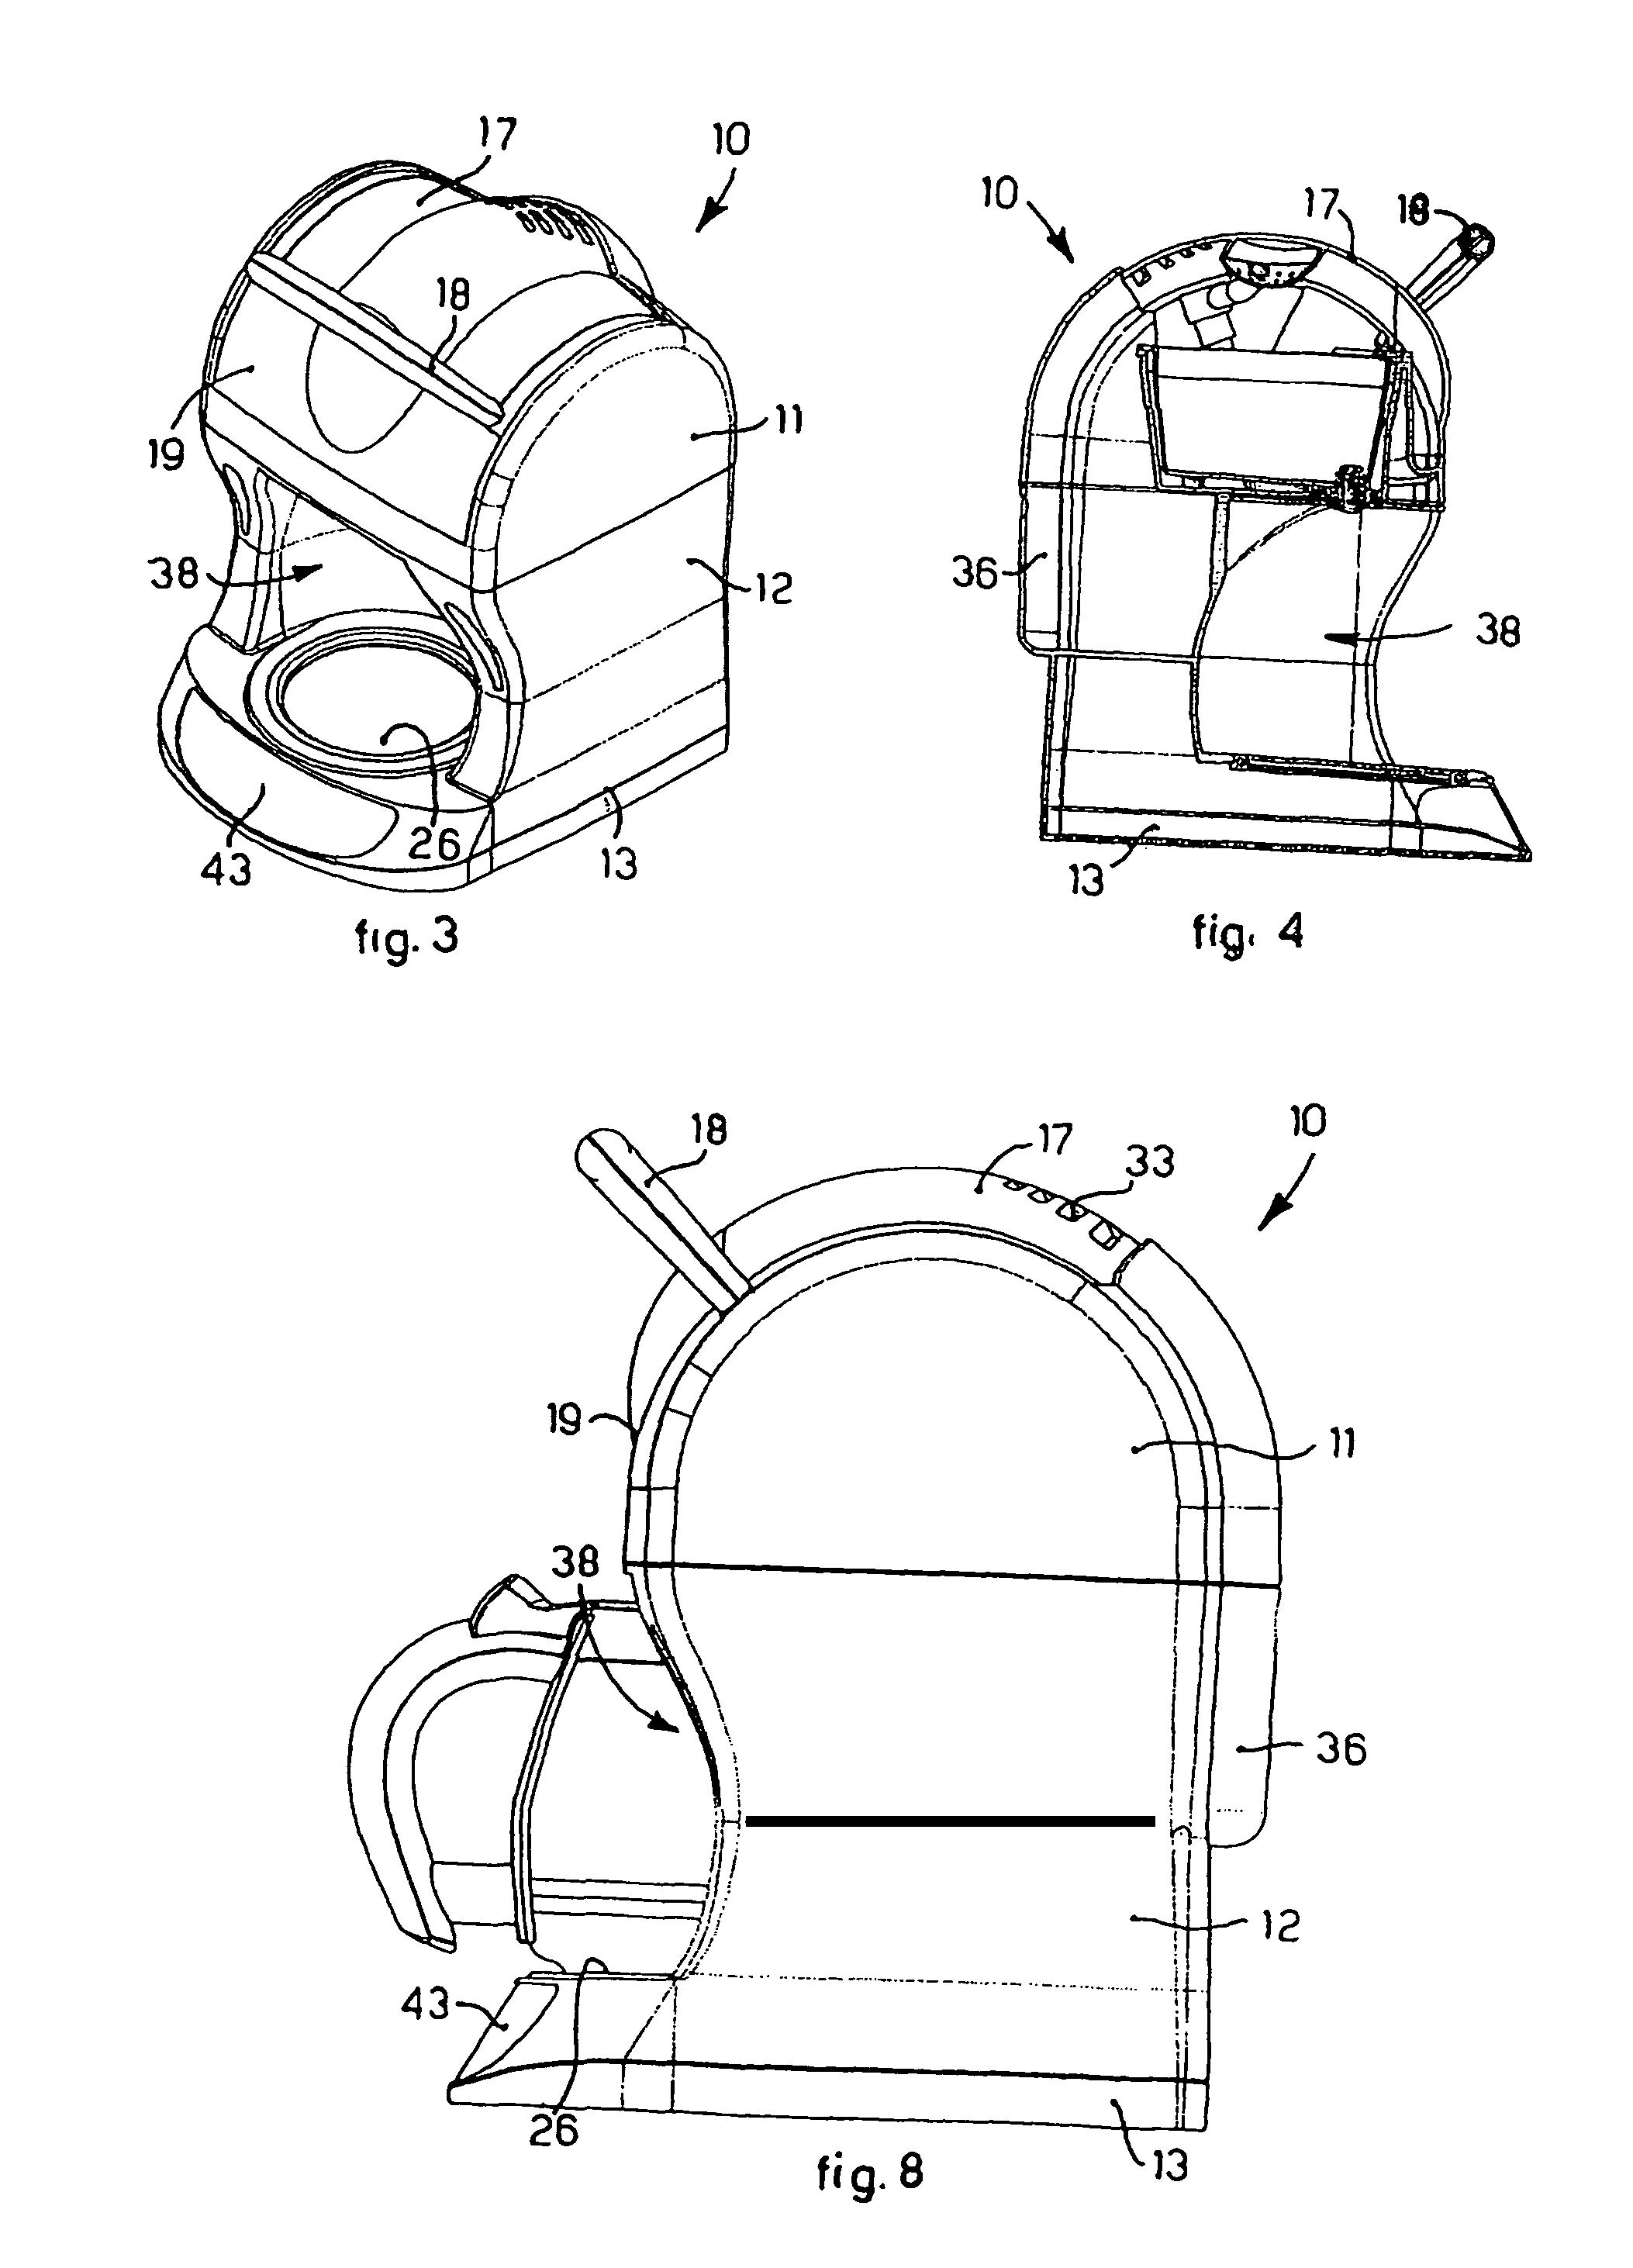 Machine for filtered coffee with shutter opening